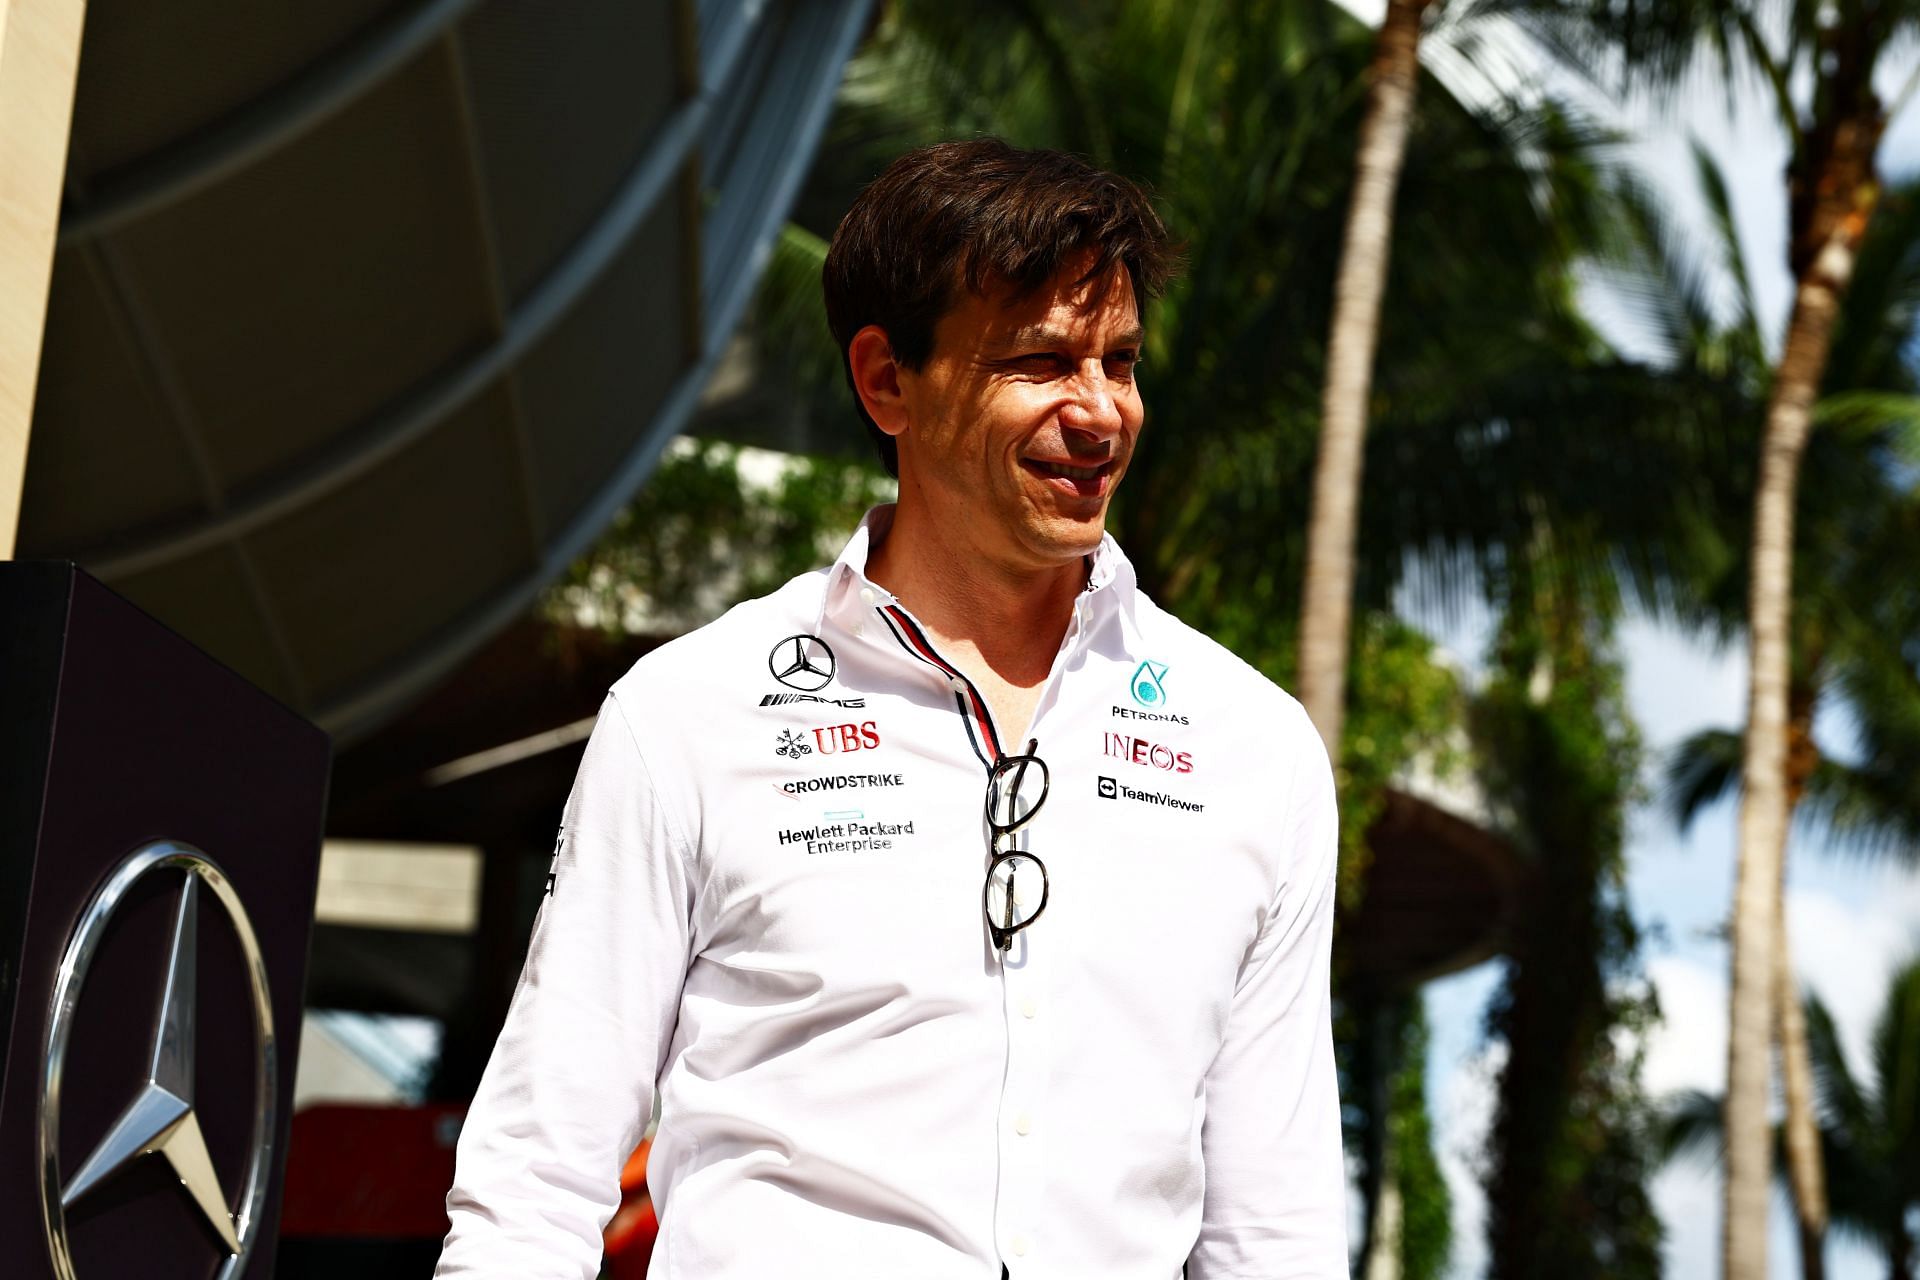 Mercedes GP Executive Director Toto Wolff walks in the Paddock prior to final practice ahead of the F1 Grand Prix of Miami at the Miami International Autodrome on May 07, 2022, in Miami, Florida. (Photo by Mark Thompson/Getty Images)